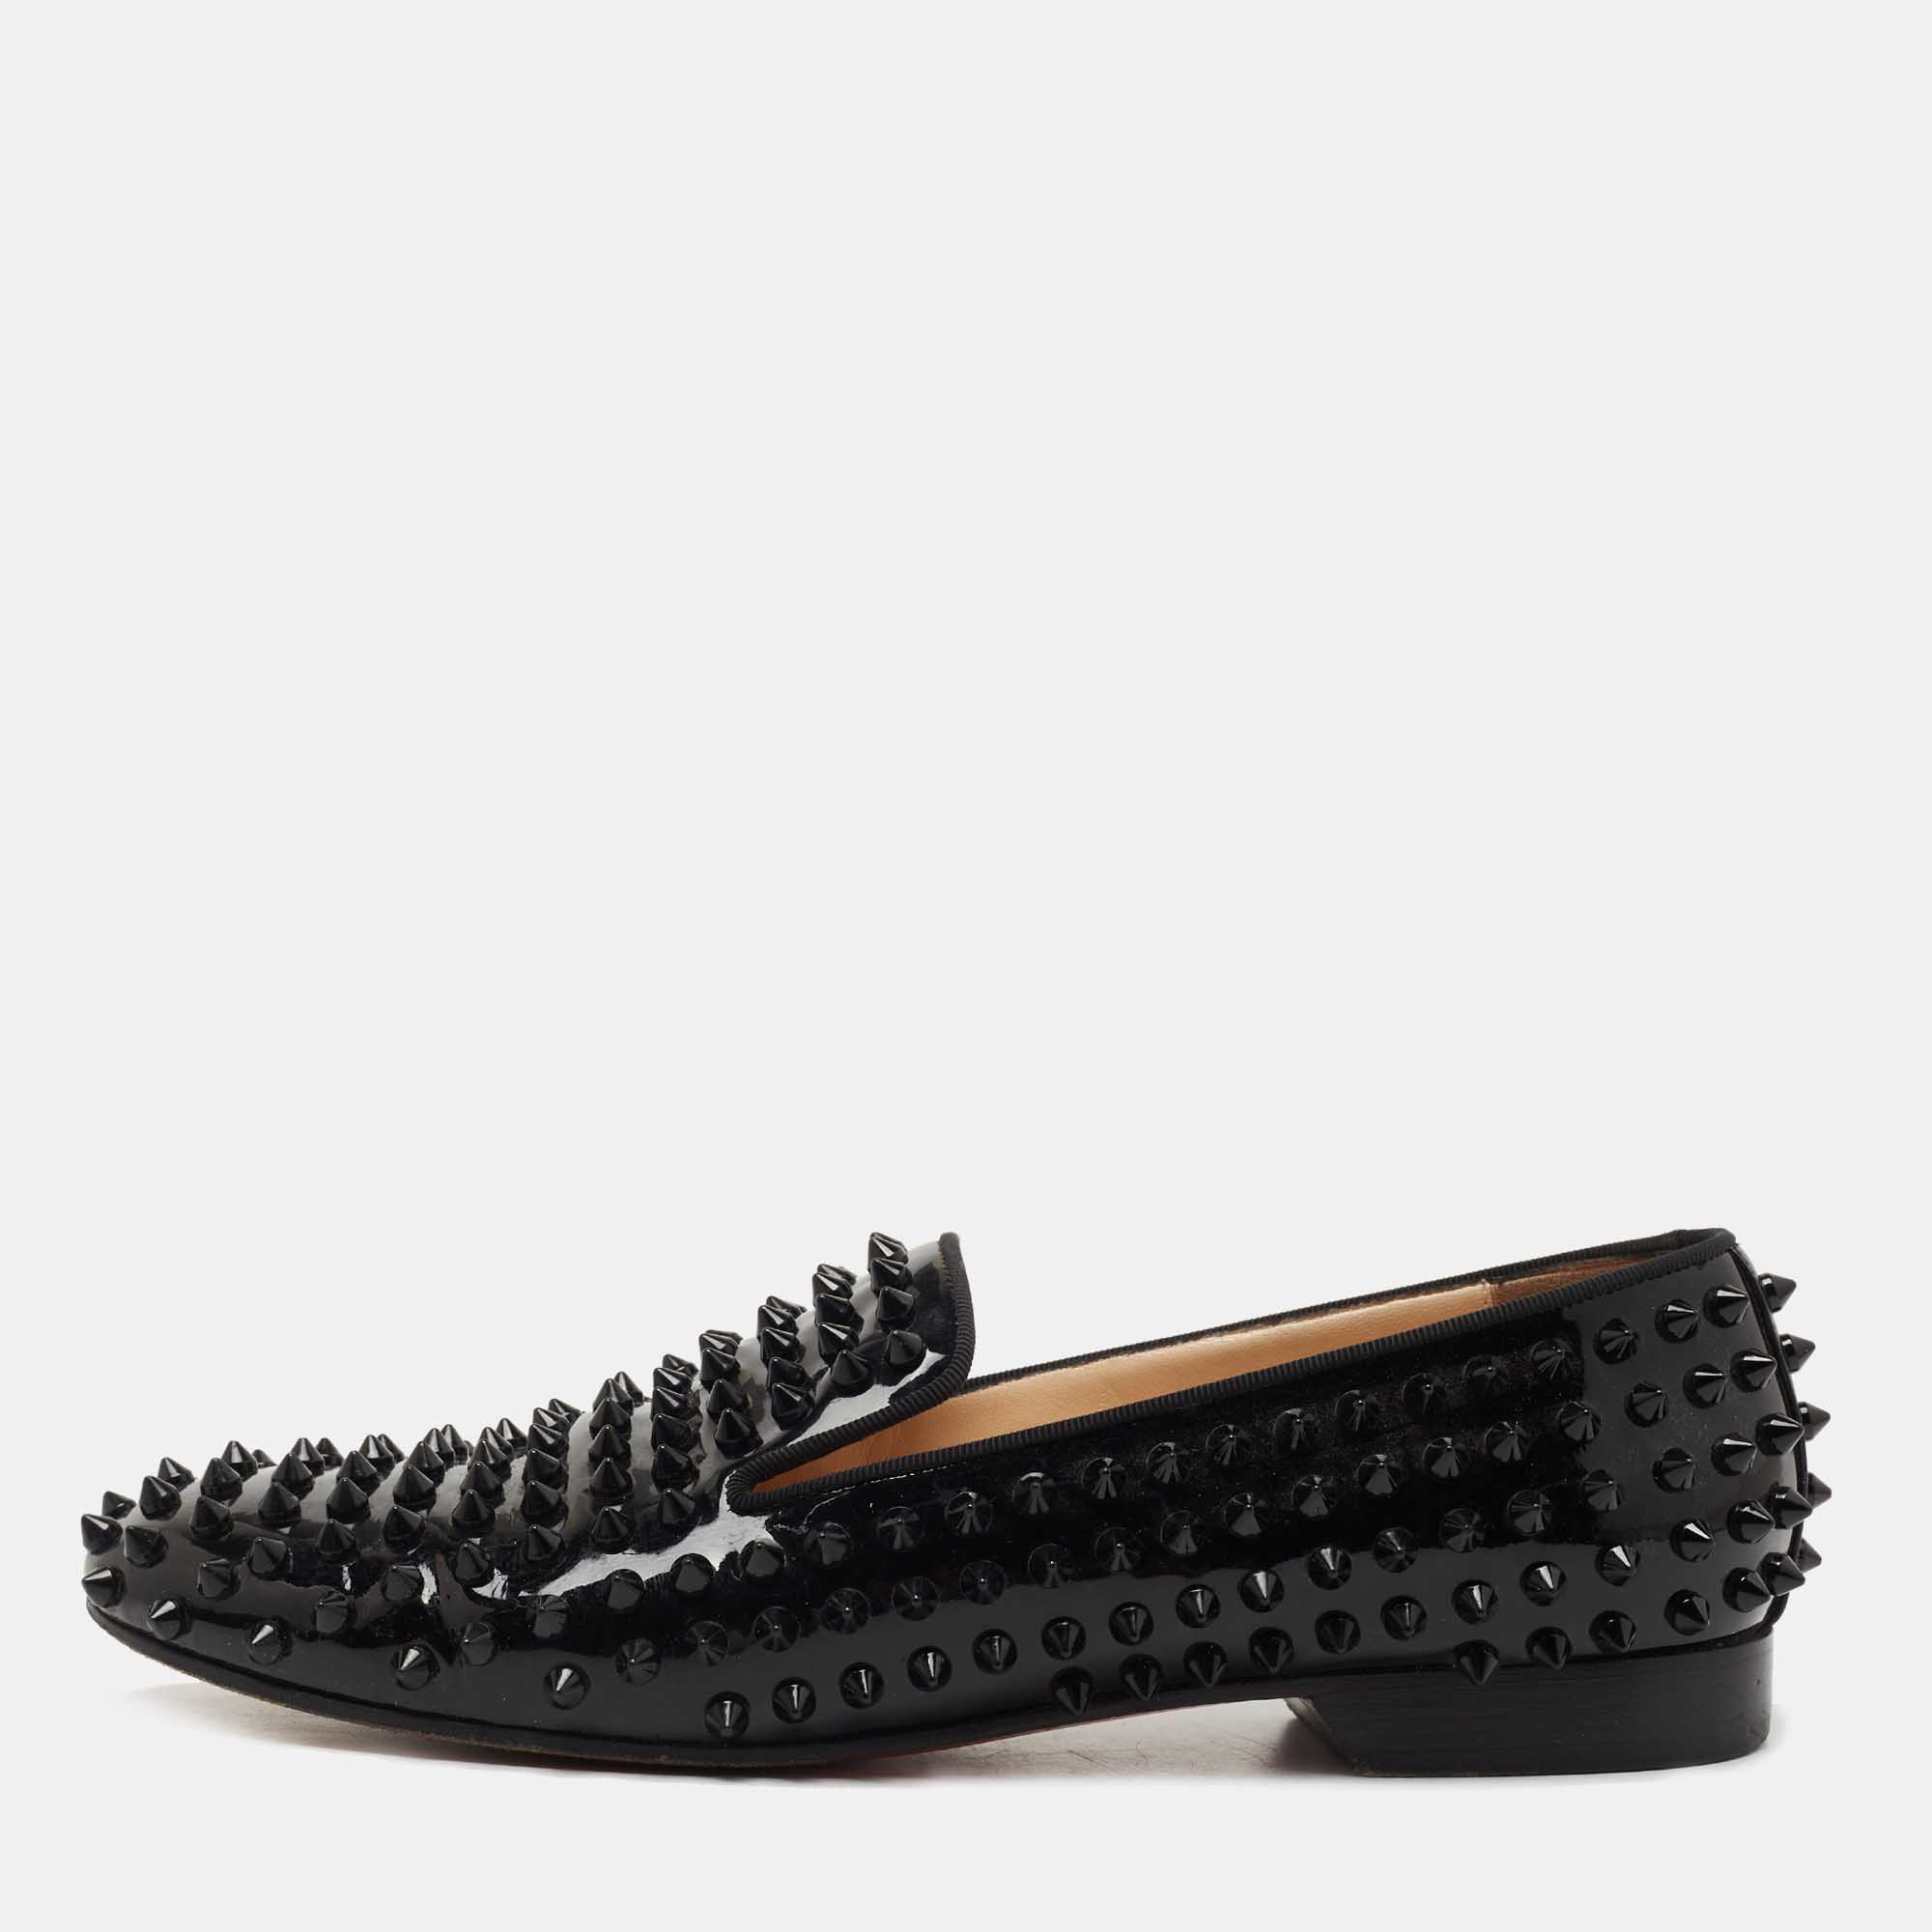 Pre-owned Christian Louboutin Black Patent Dandelion Spikes Loafers Size 39.5